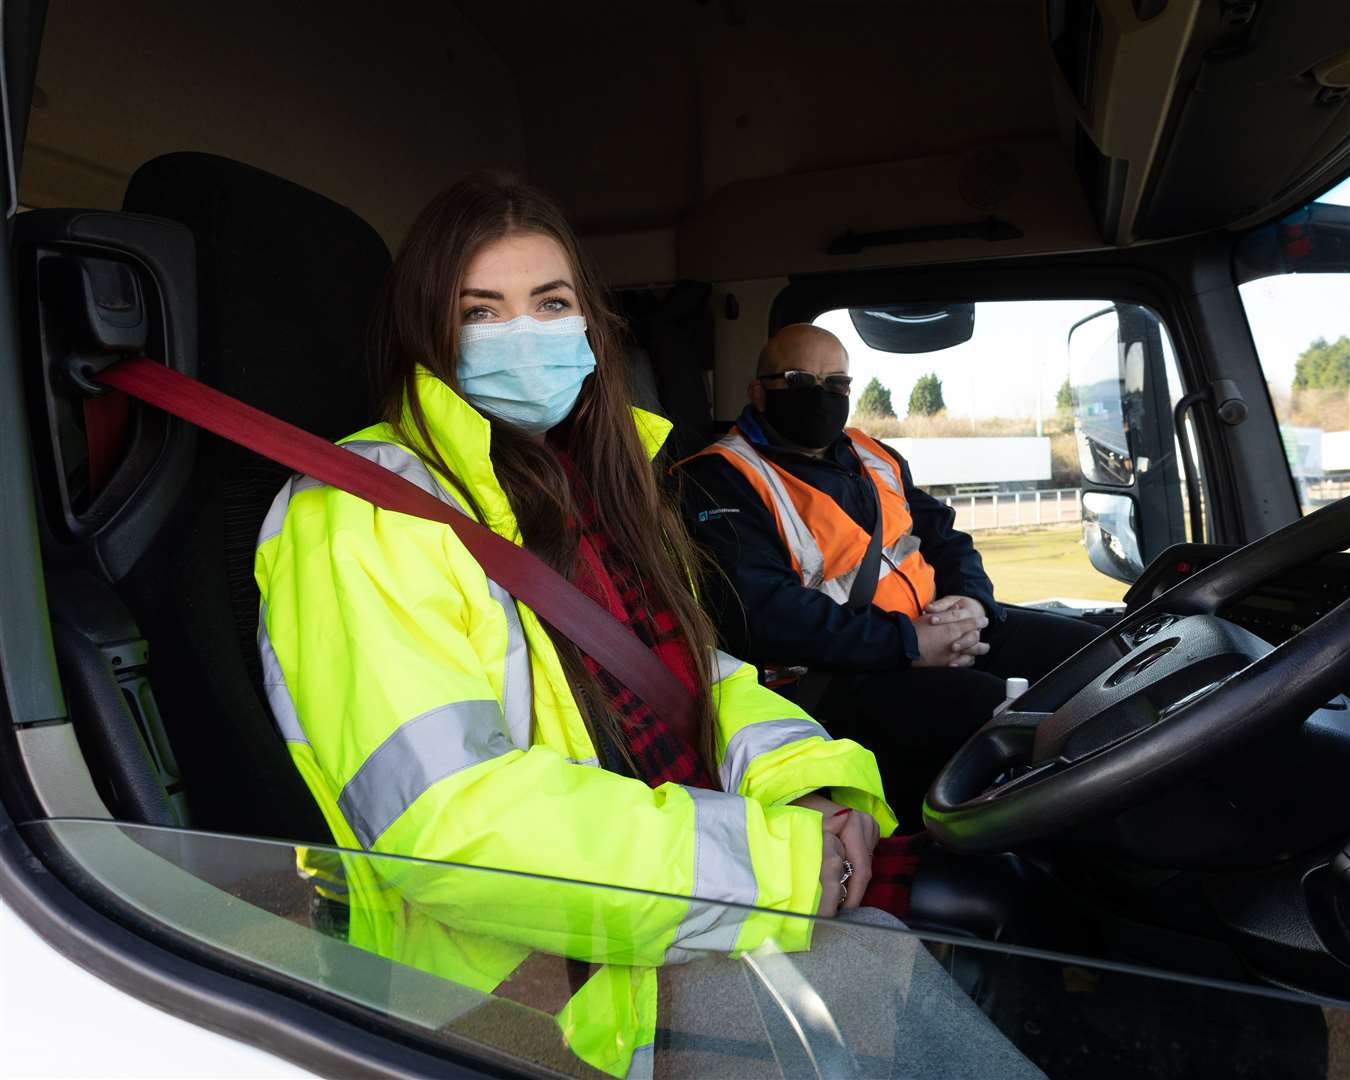 Learner driver Amy Chambers takes on the training programme at one of providers of the scheme, Mainstream Training in Sittingbourne